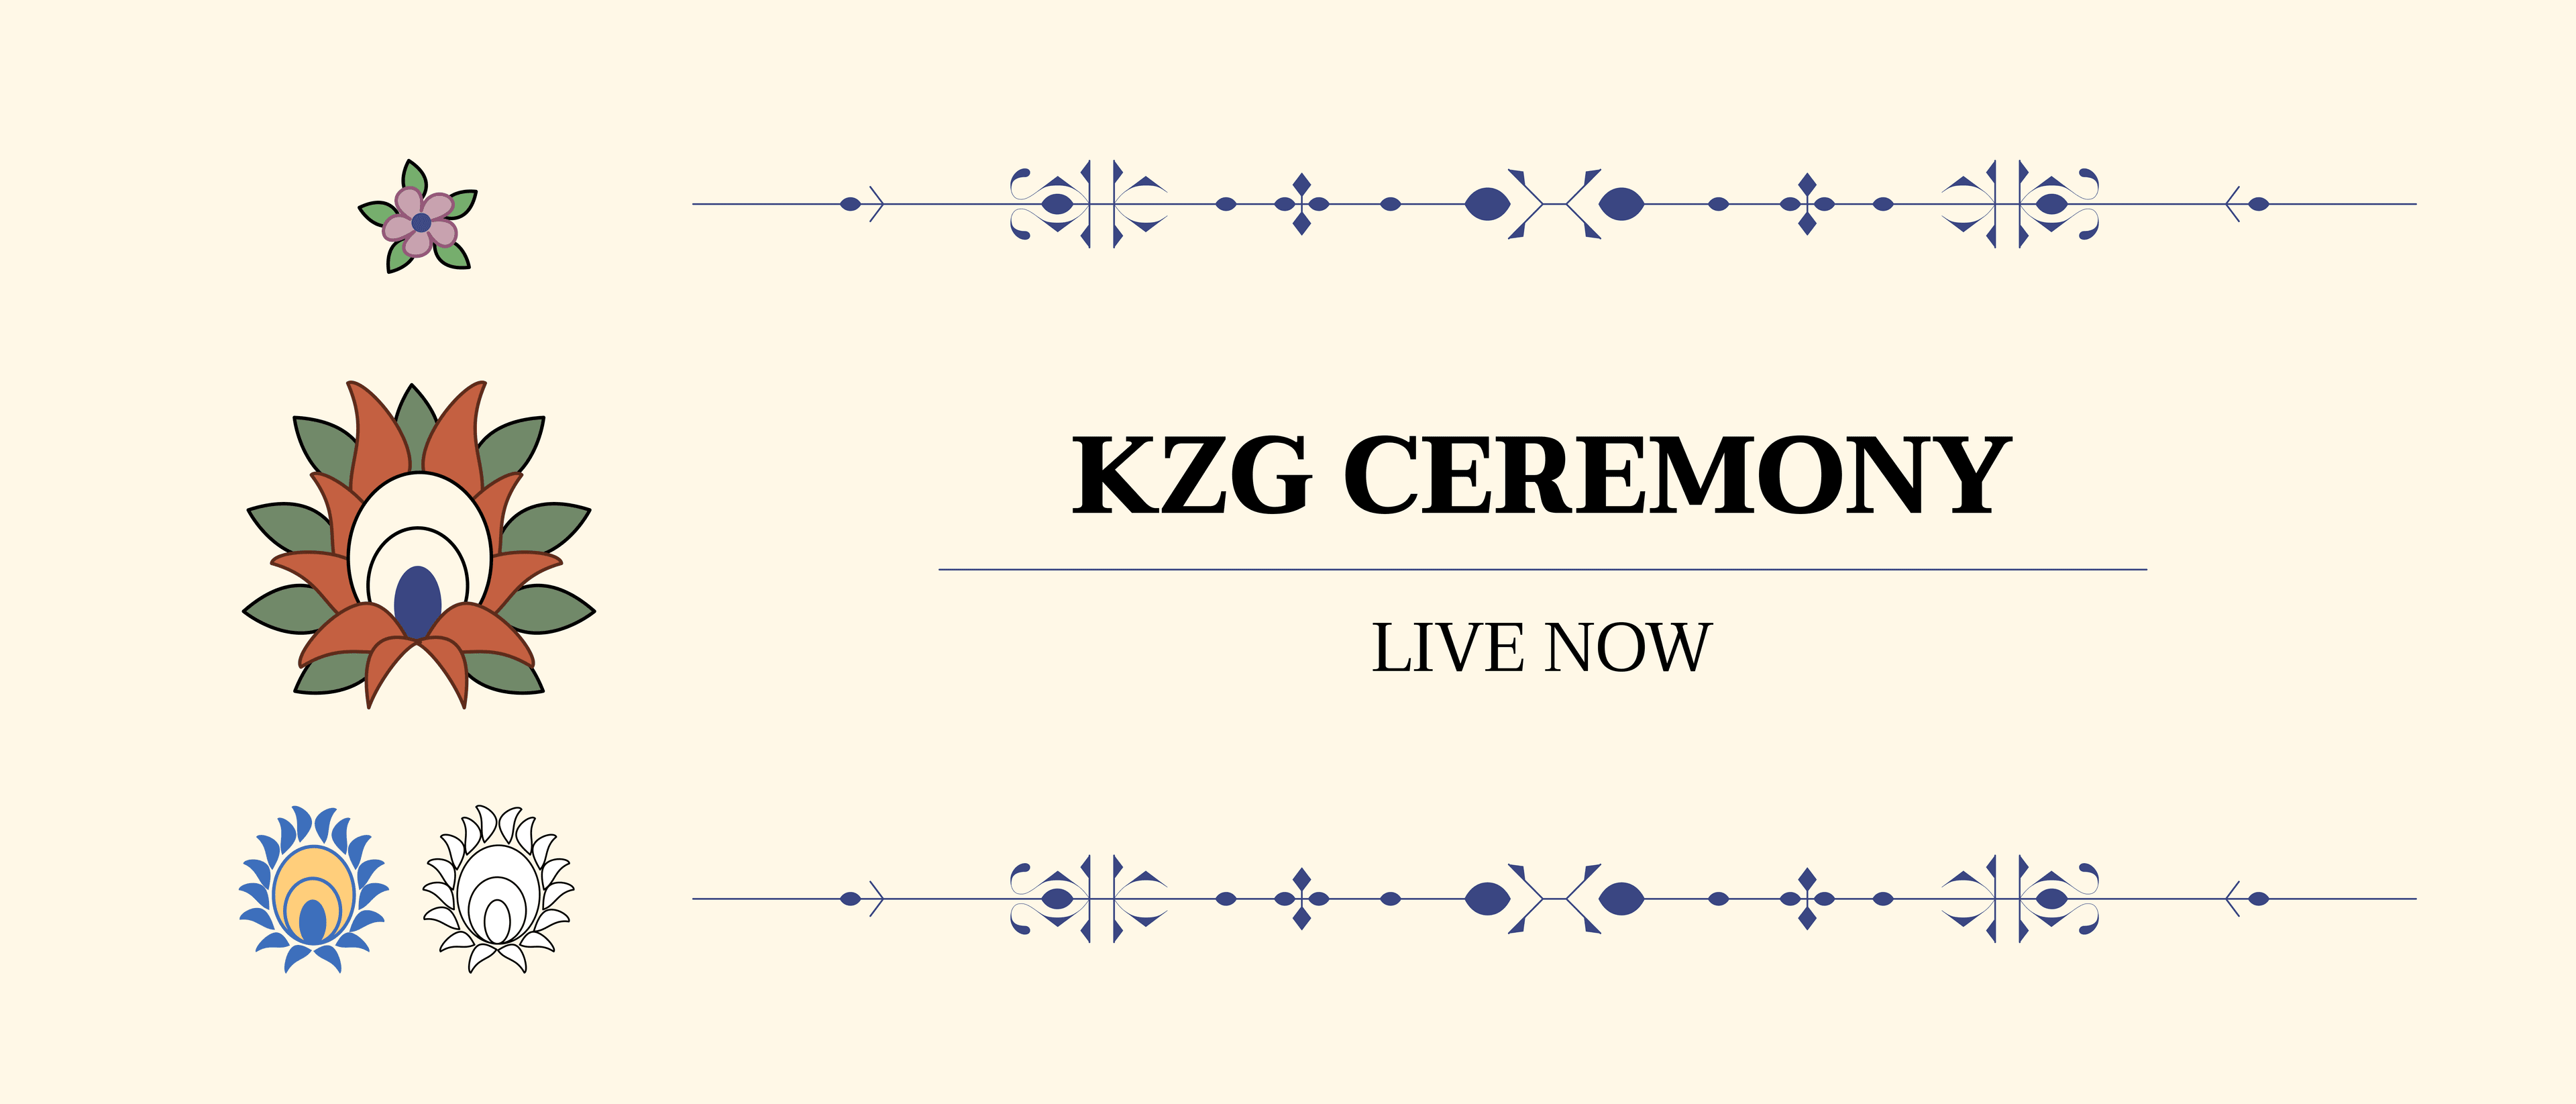 Announcing the KZG Ceremony